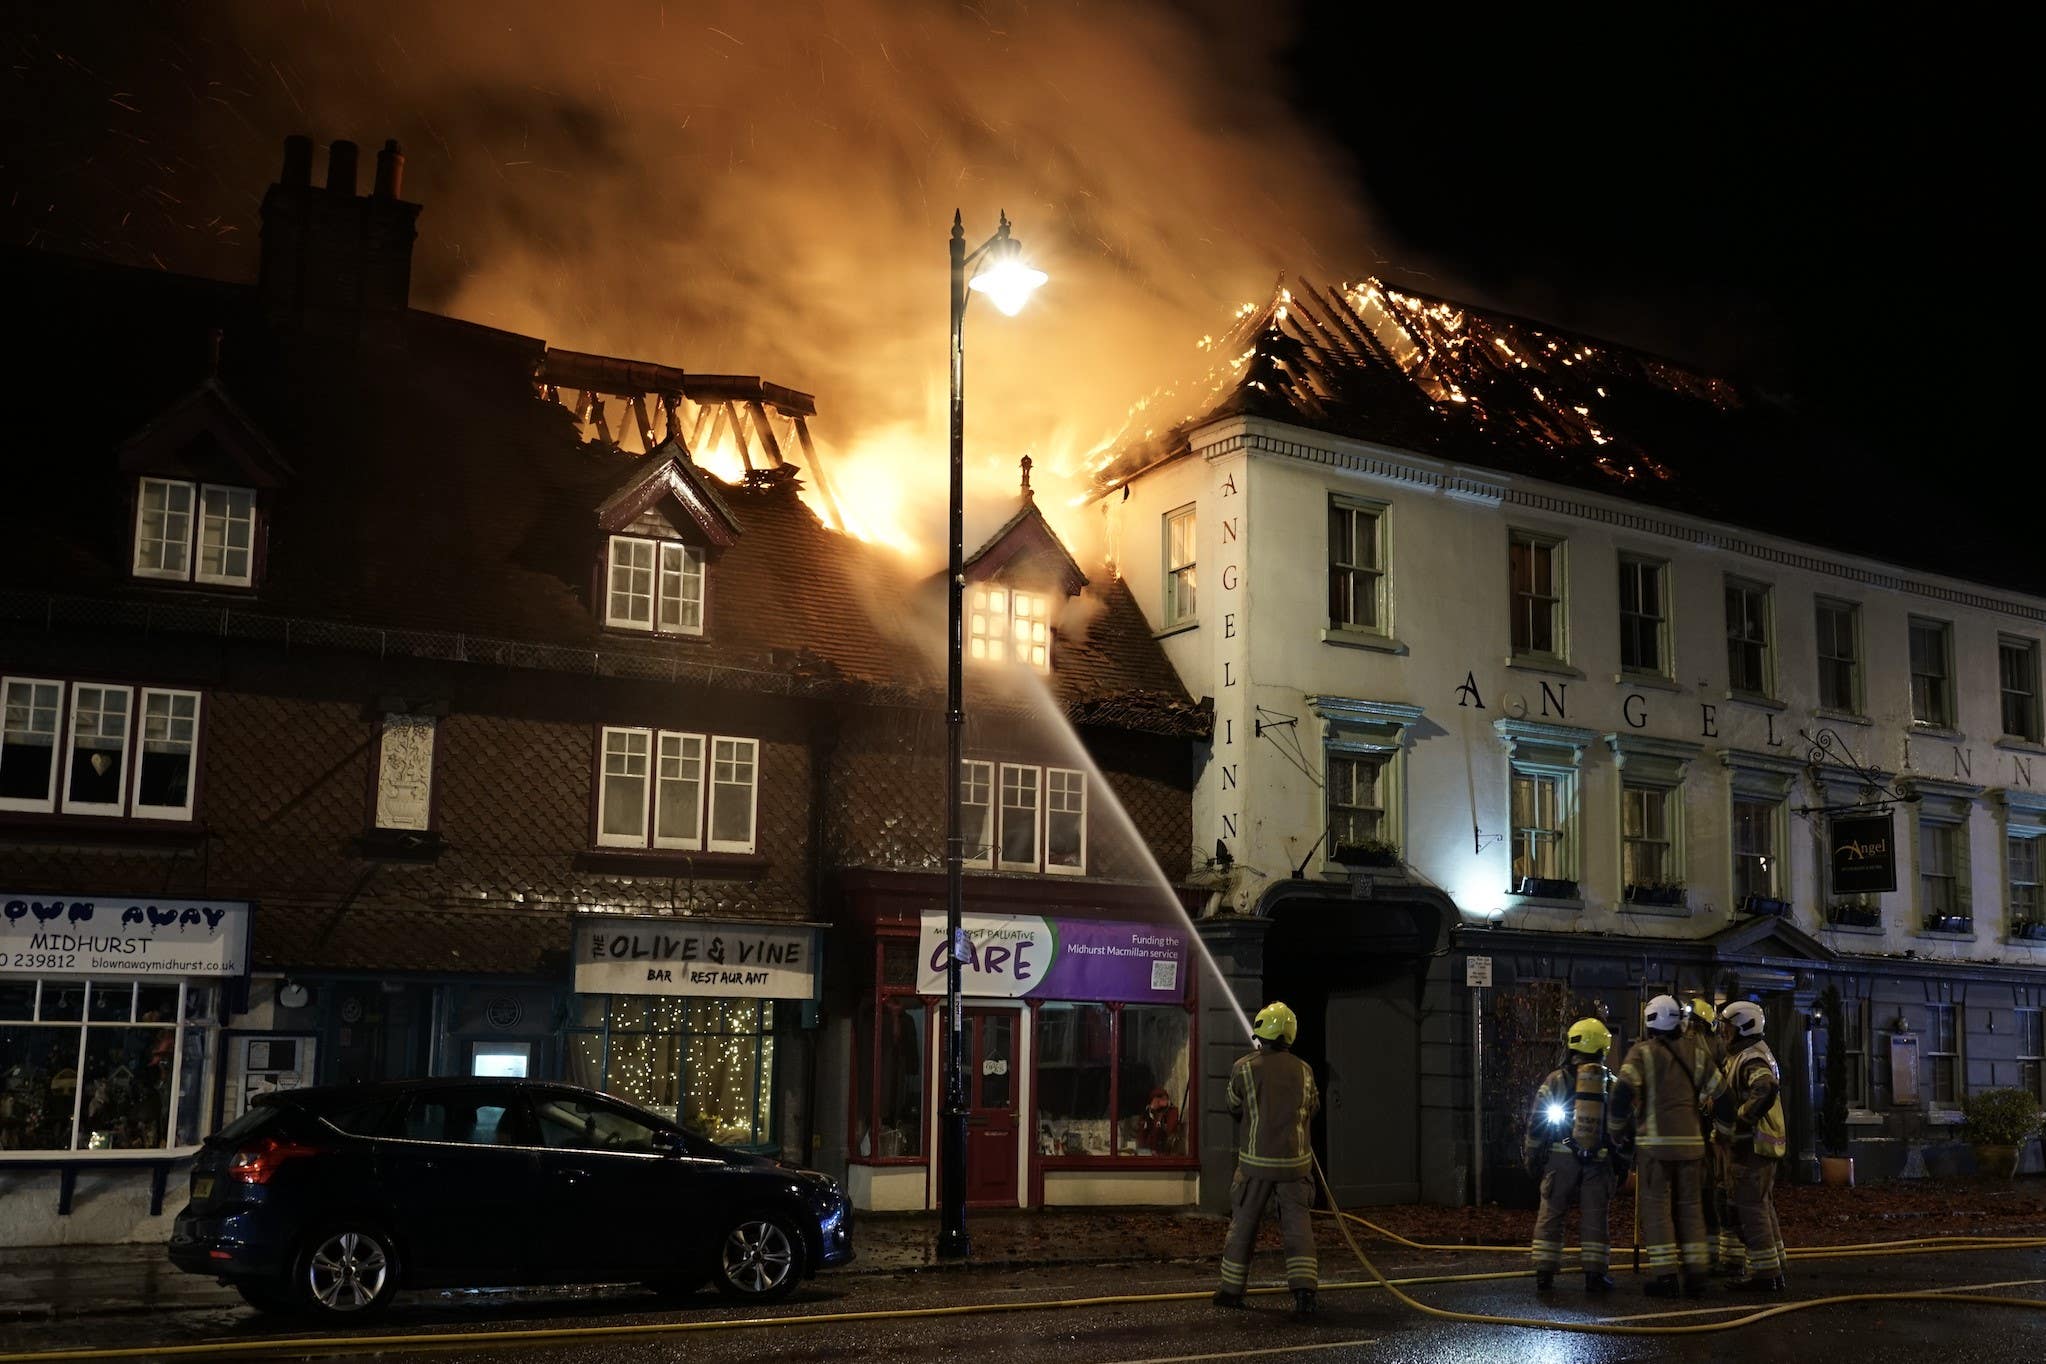 Fire engulfed several buildings in Midhurst, West Sussex